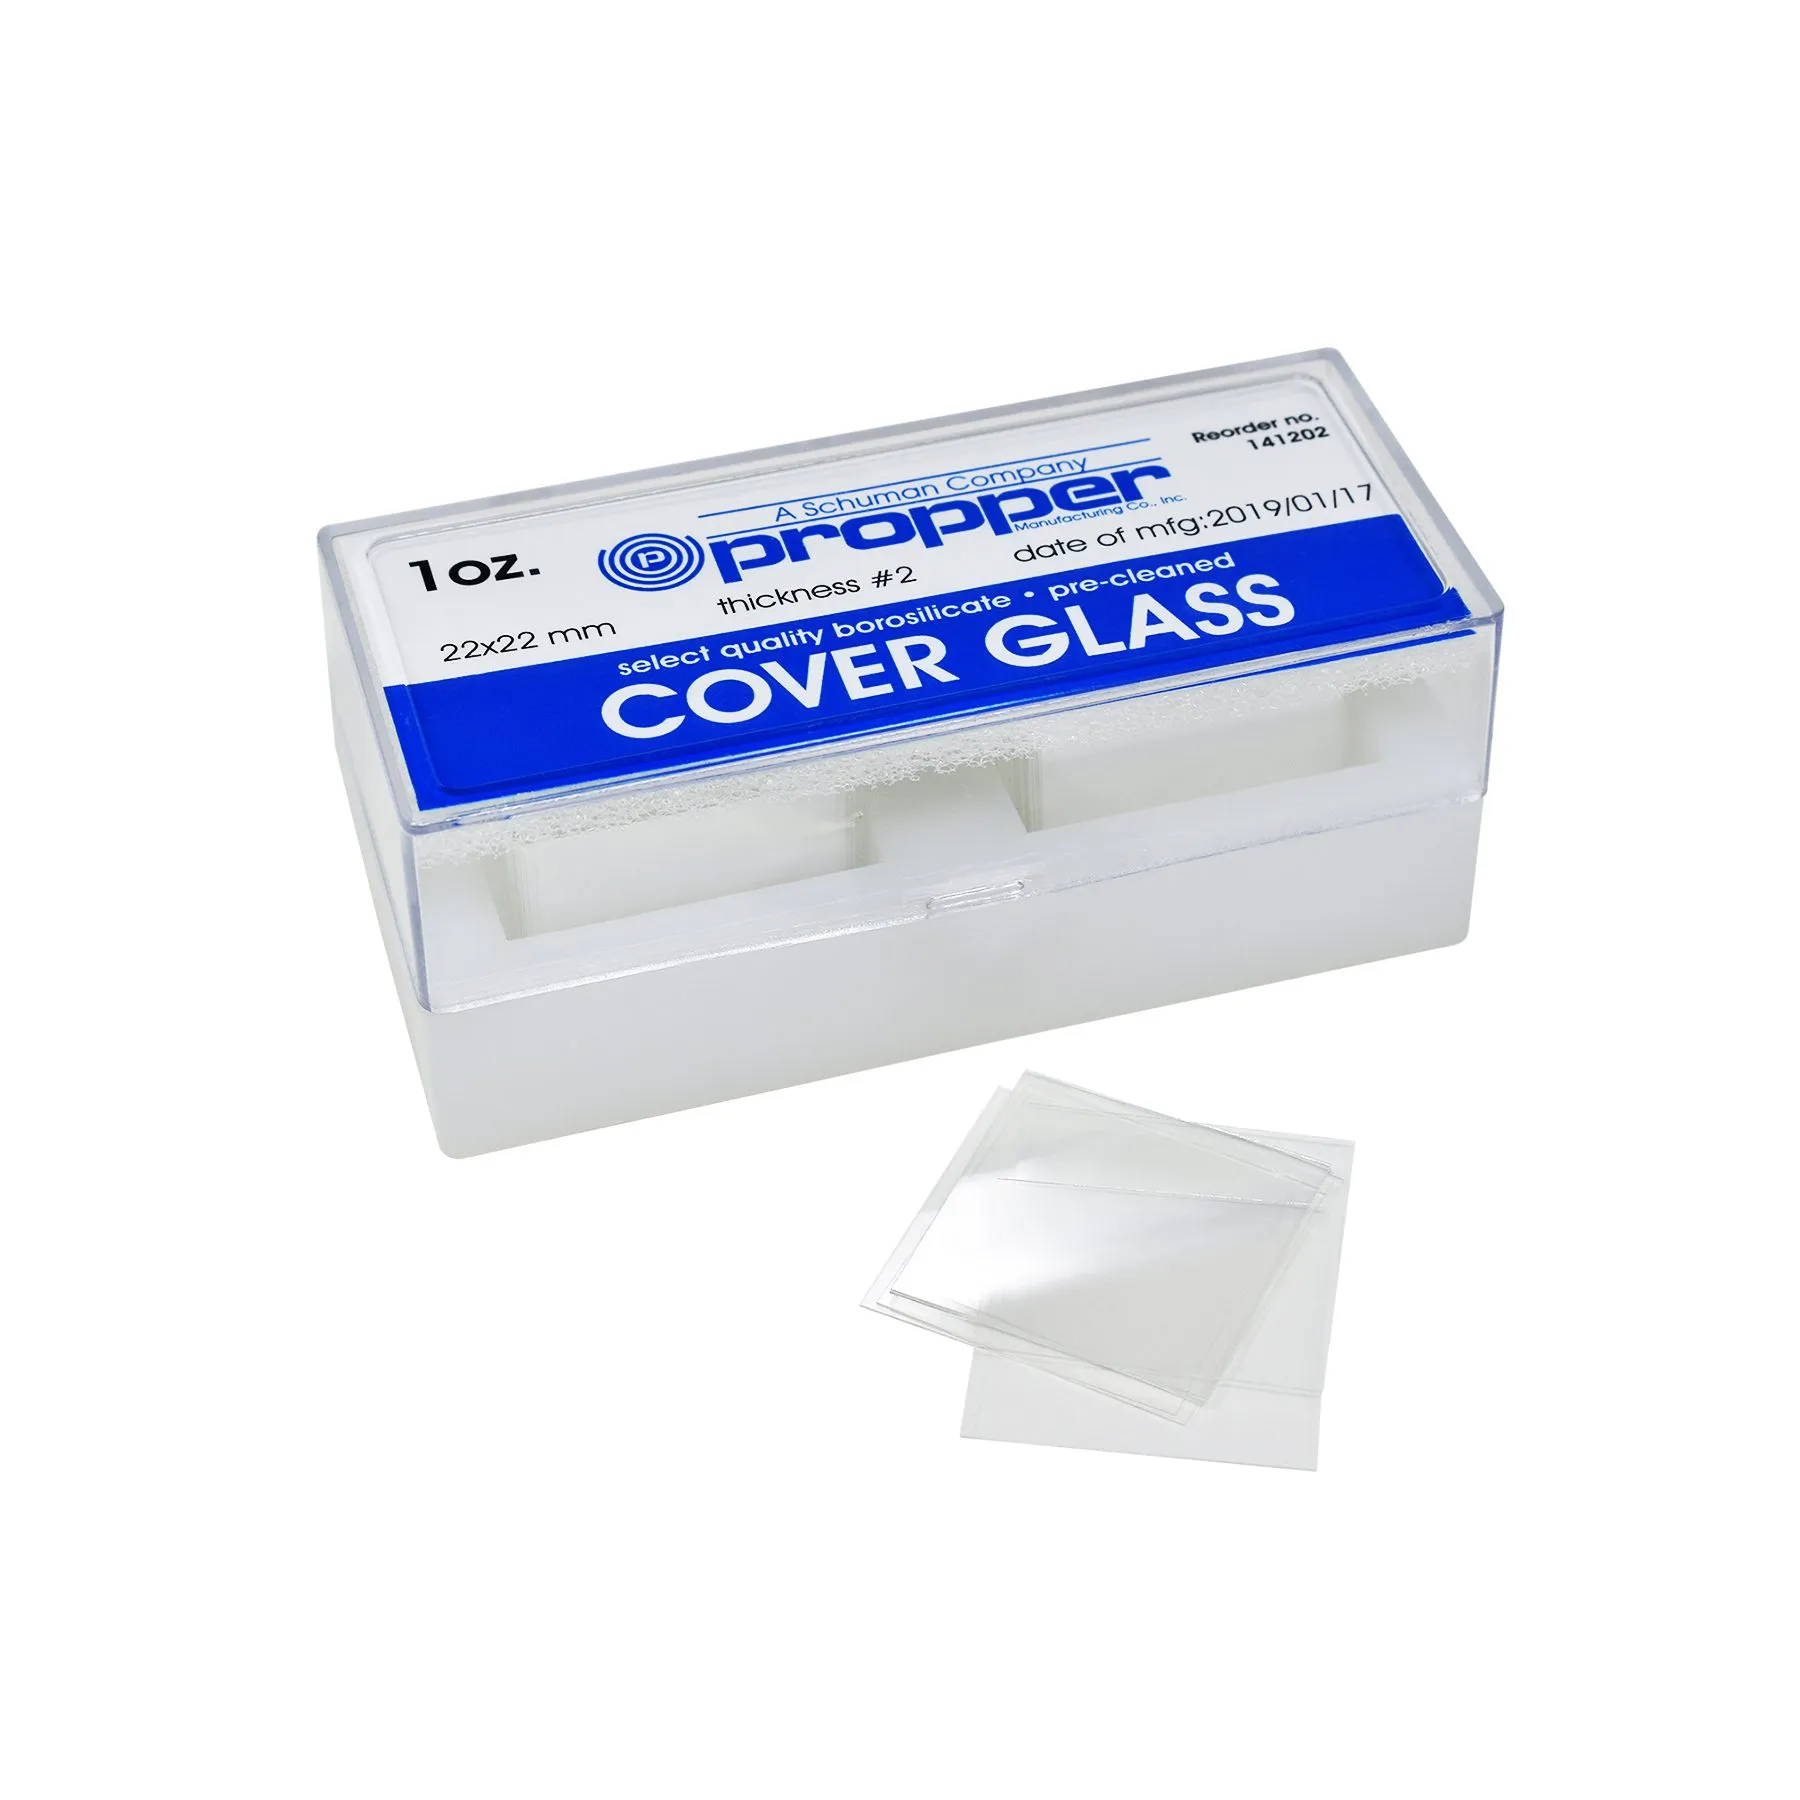 Propper - From: 14110200 To: 14130900 - Manufacturing Microscope Slide Cover Glass